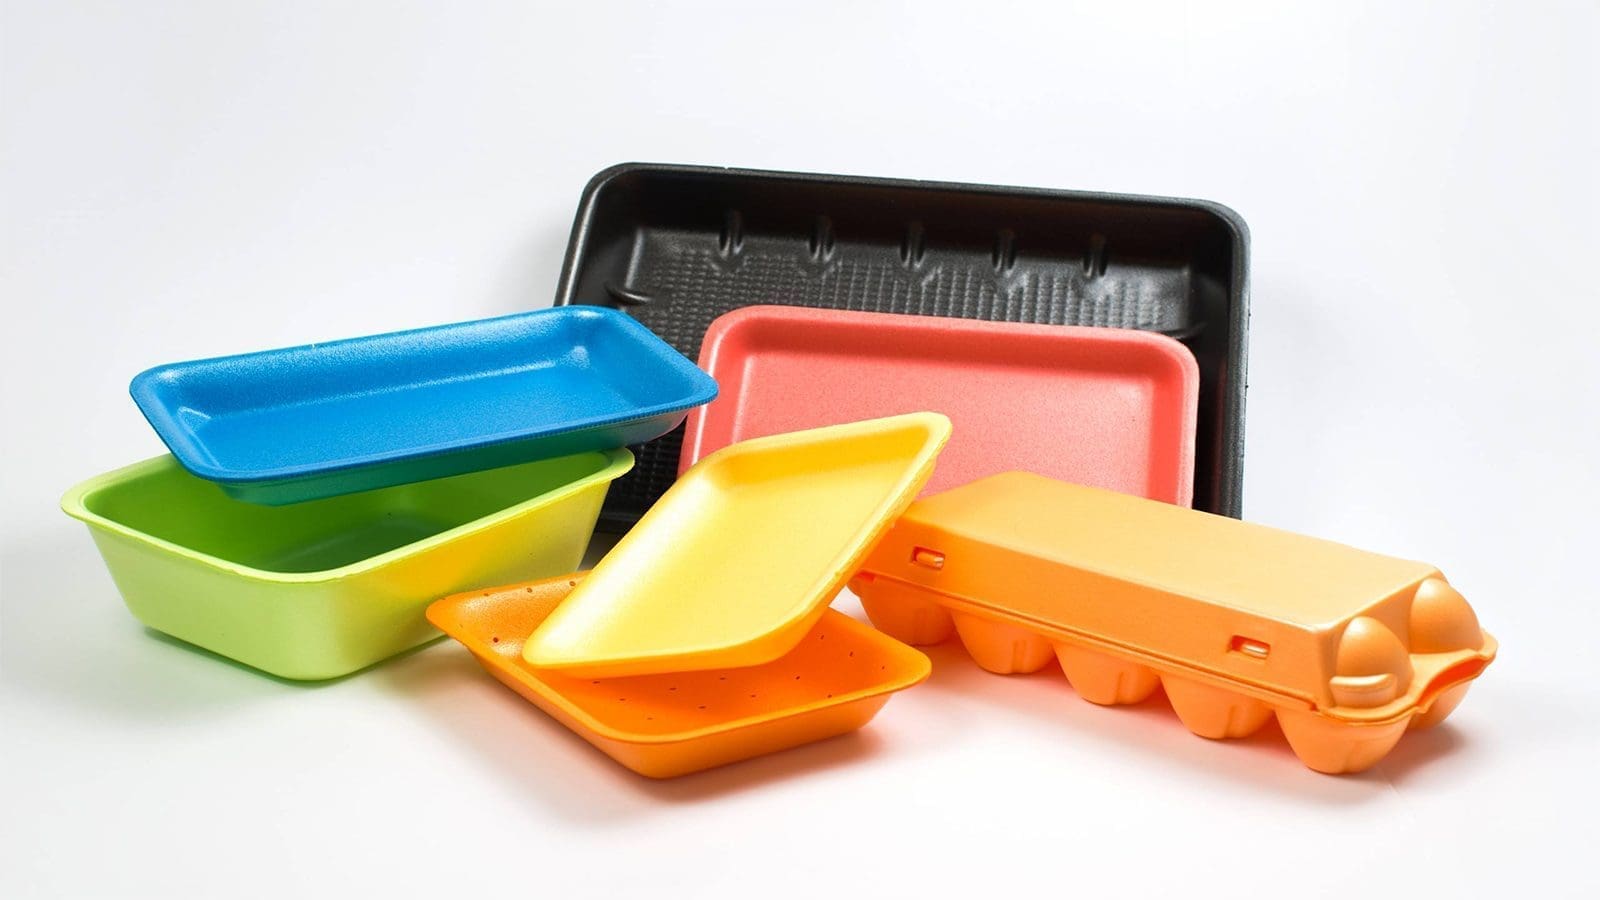 SCS seeks EFSA approval in use of mechanically recycled polystyrene as food contact material